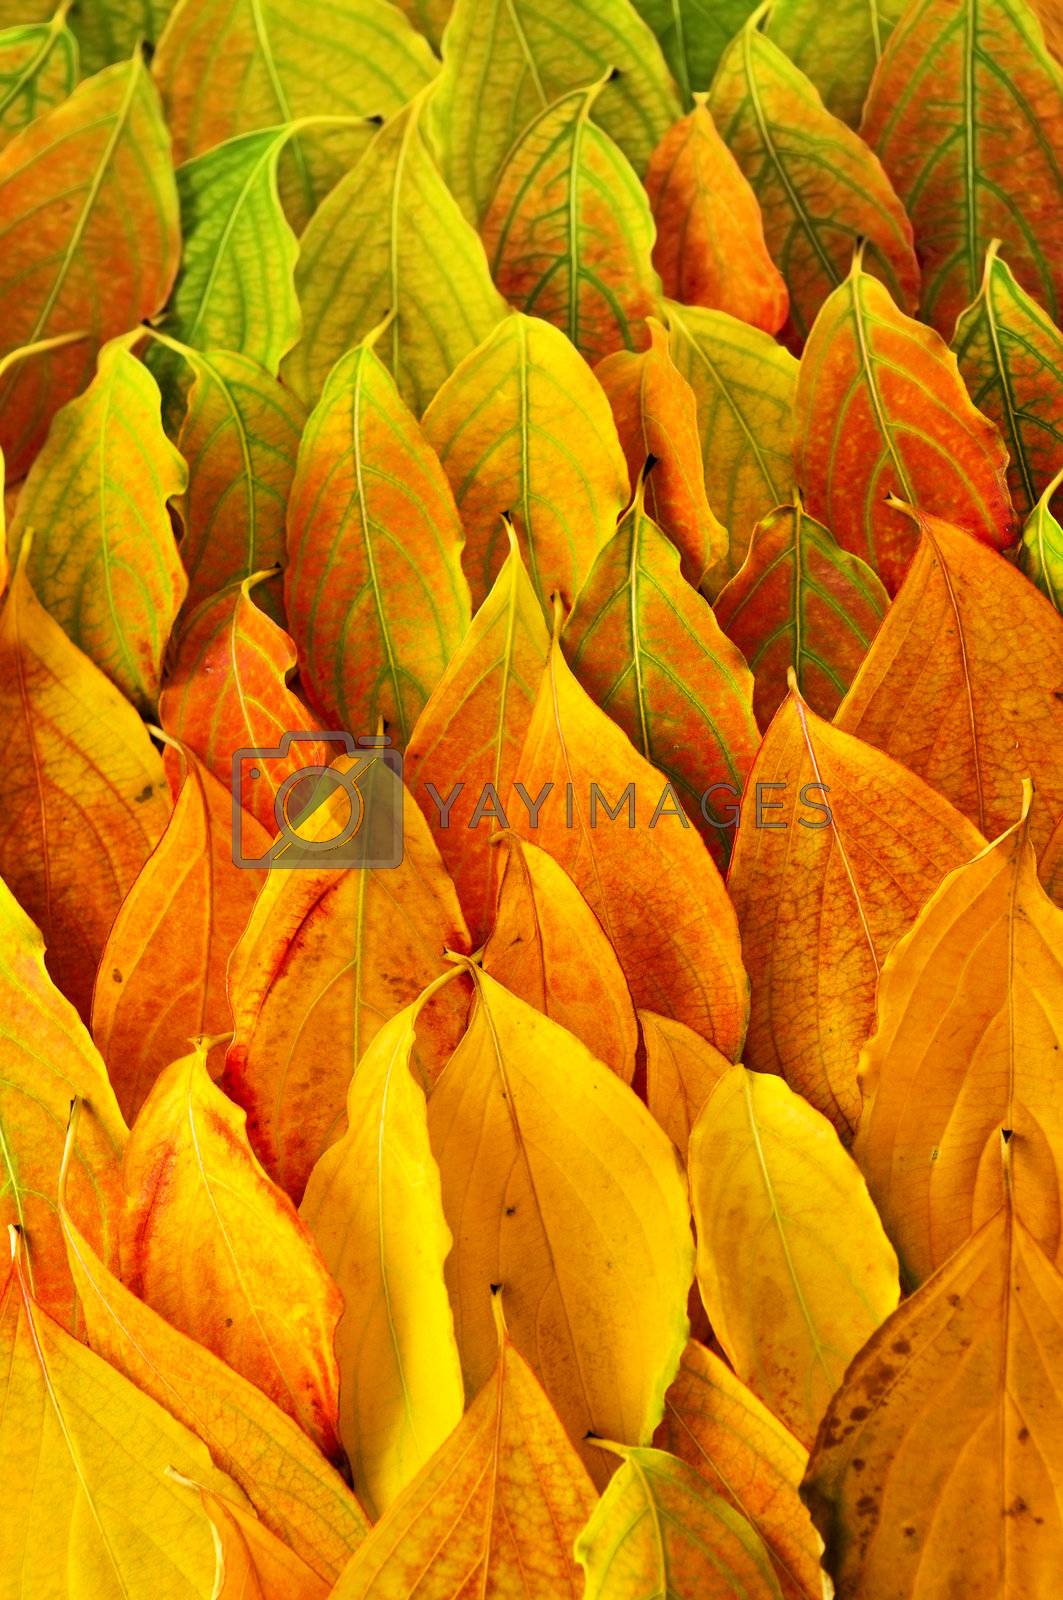 Royalty free image of Autumn leaves background by elenathewise